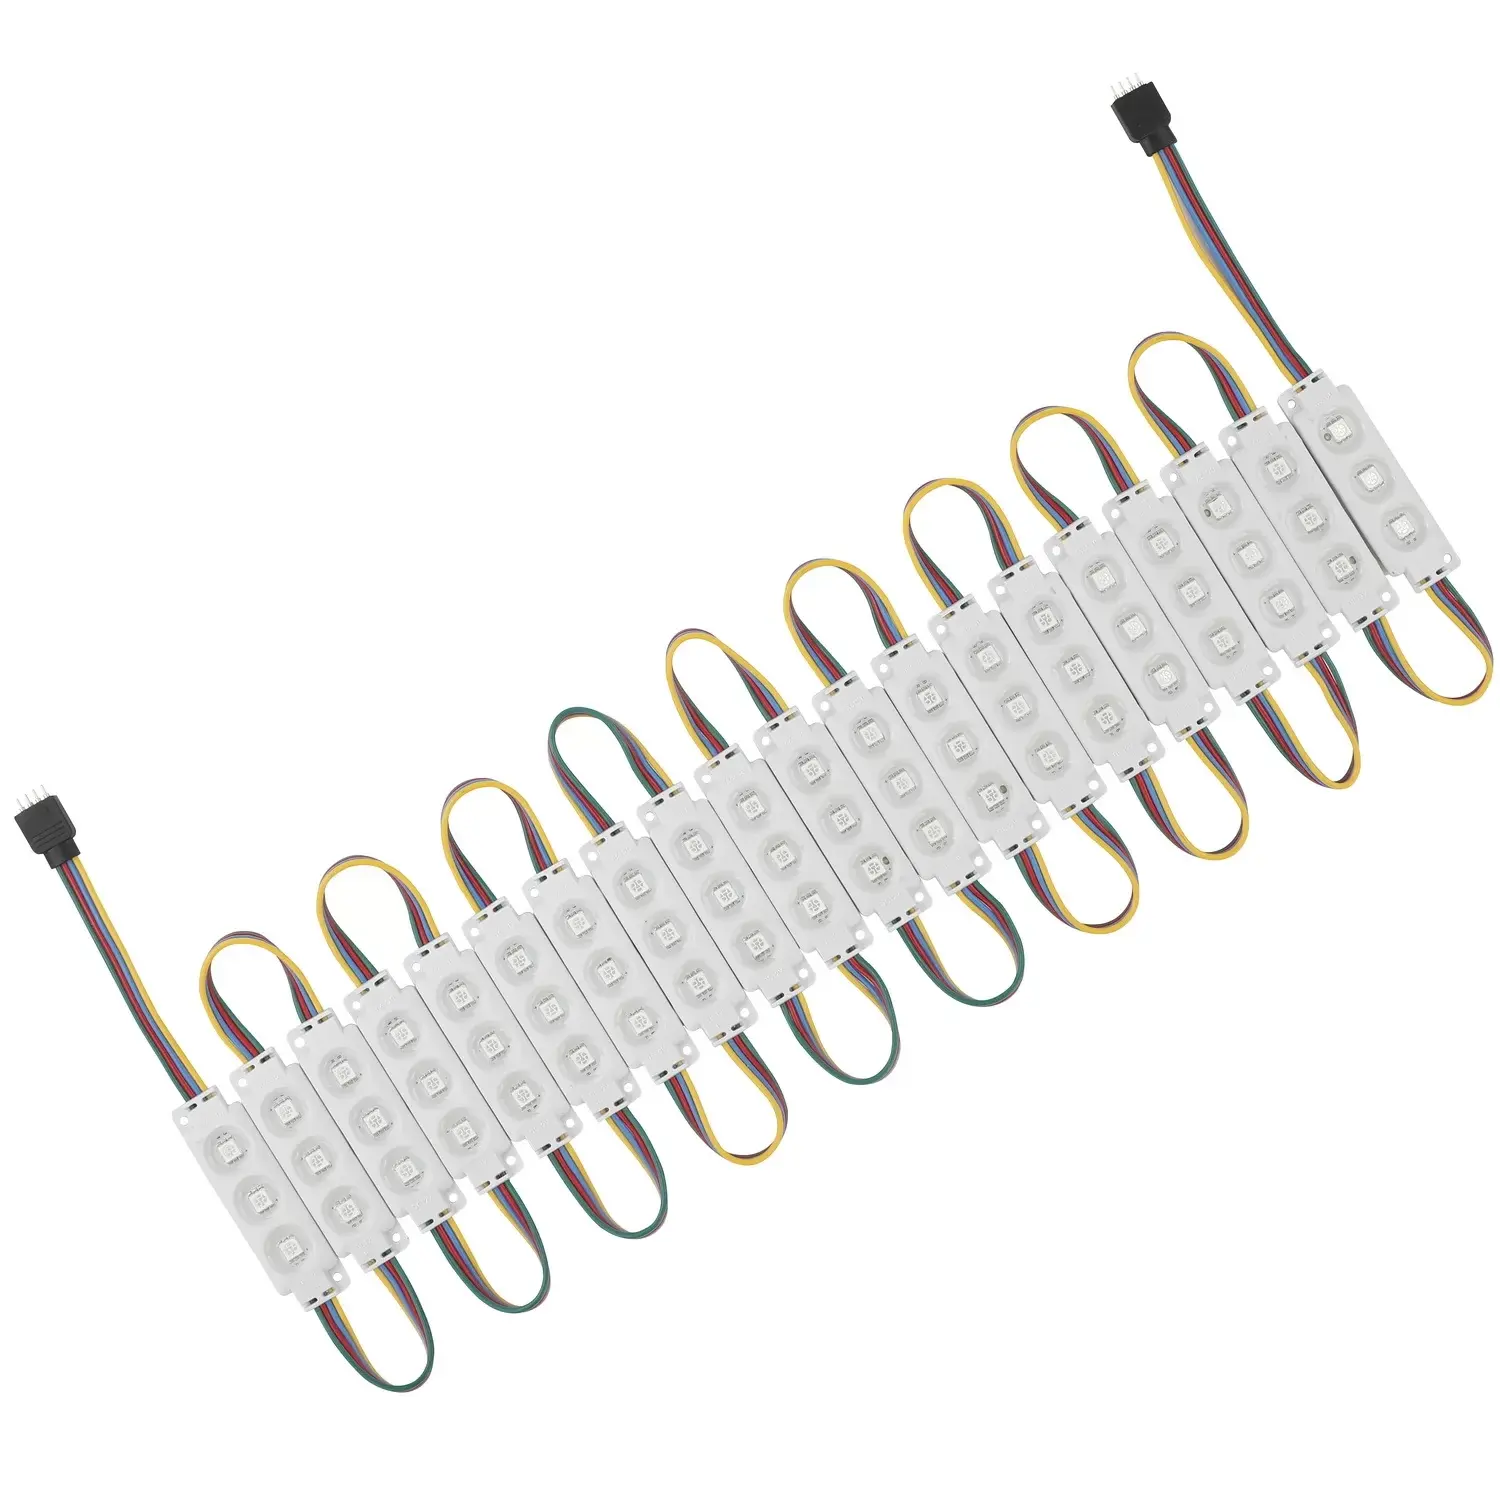 UL certified high quality LED smd 5050 module LED for advertise box RGB LED modules